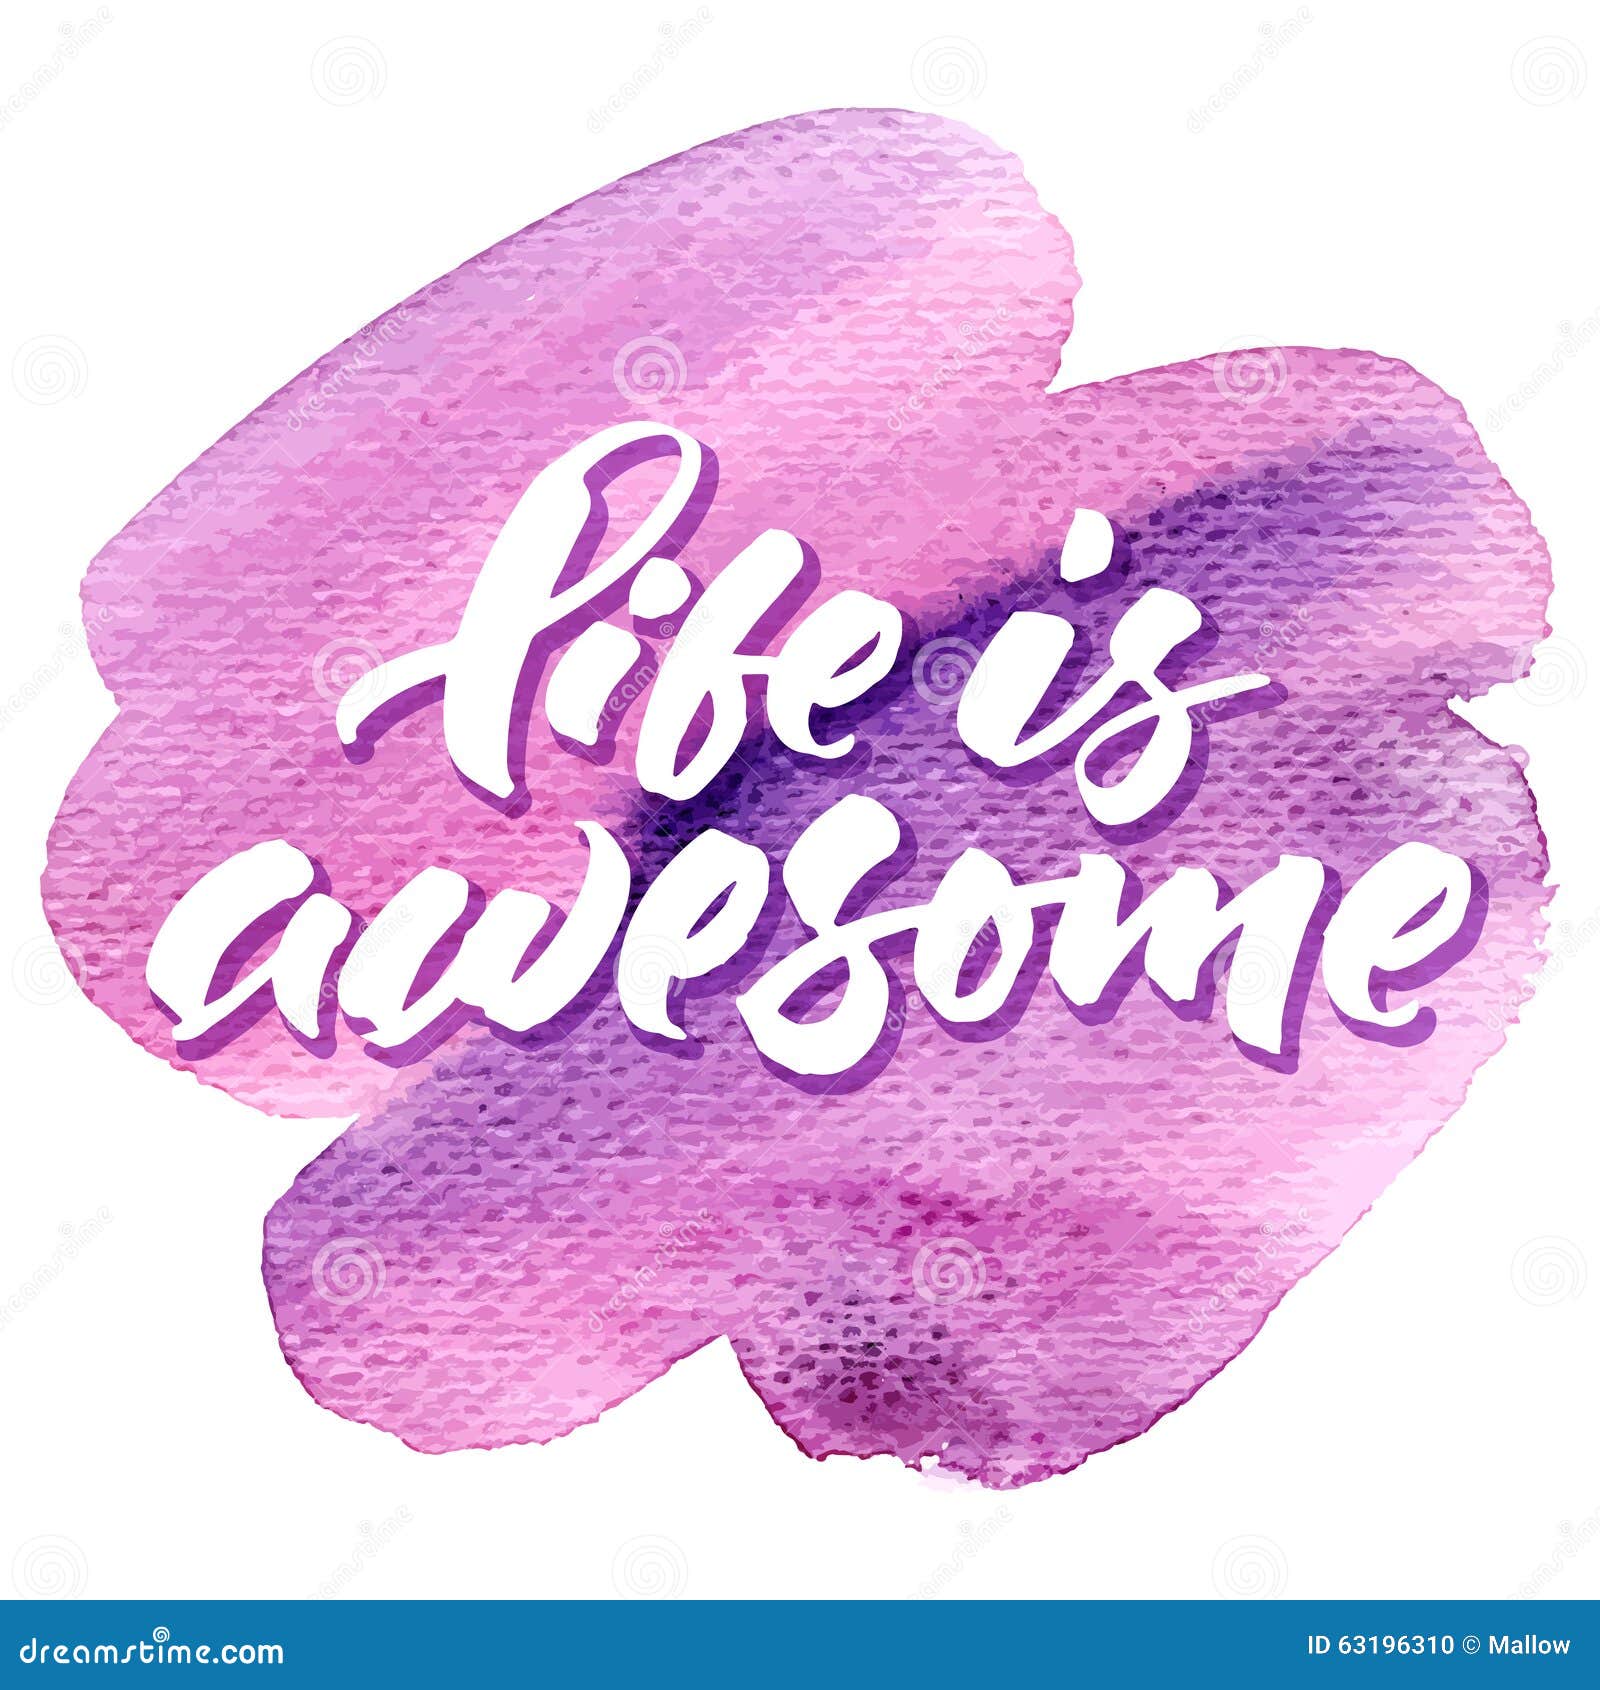 life is awesome